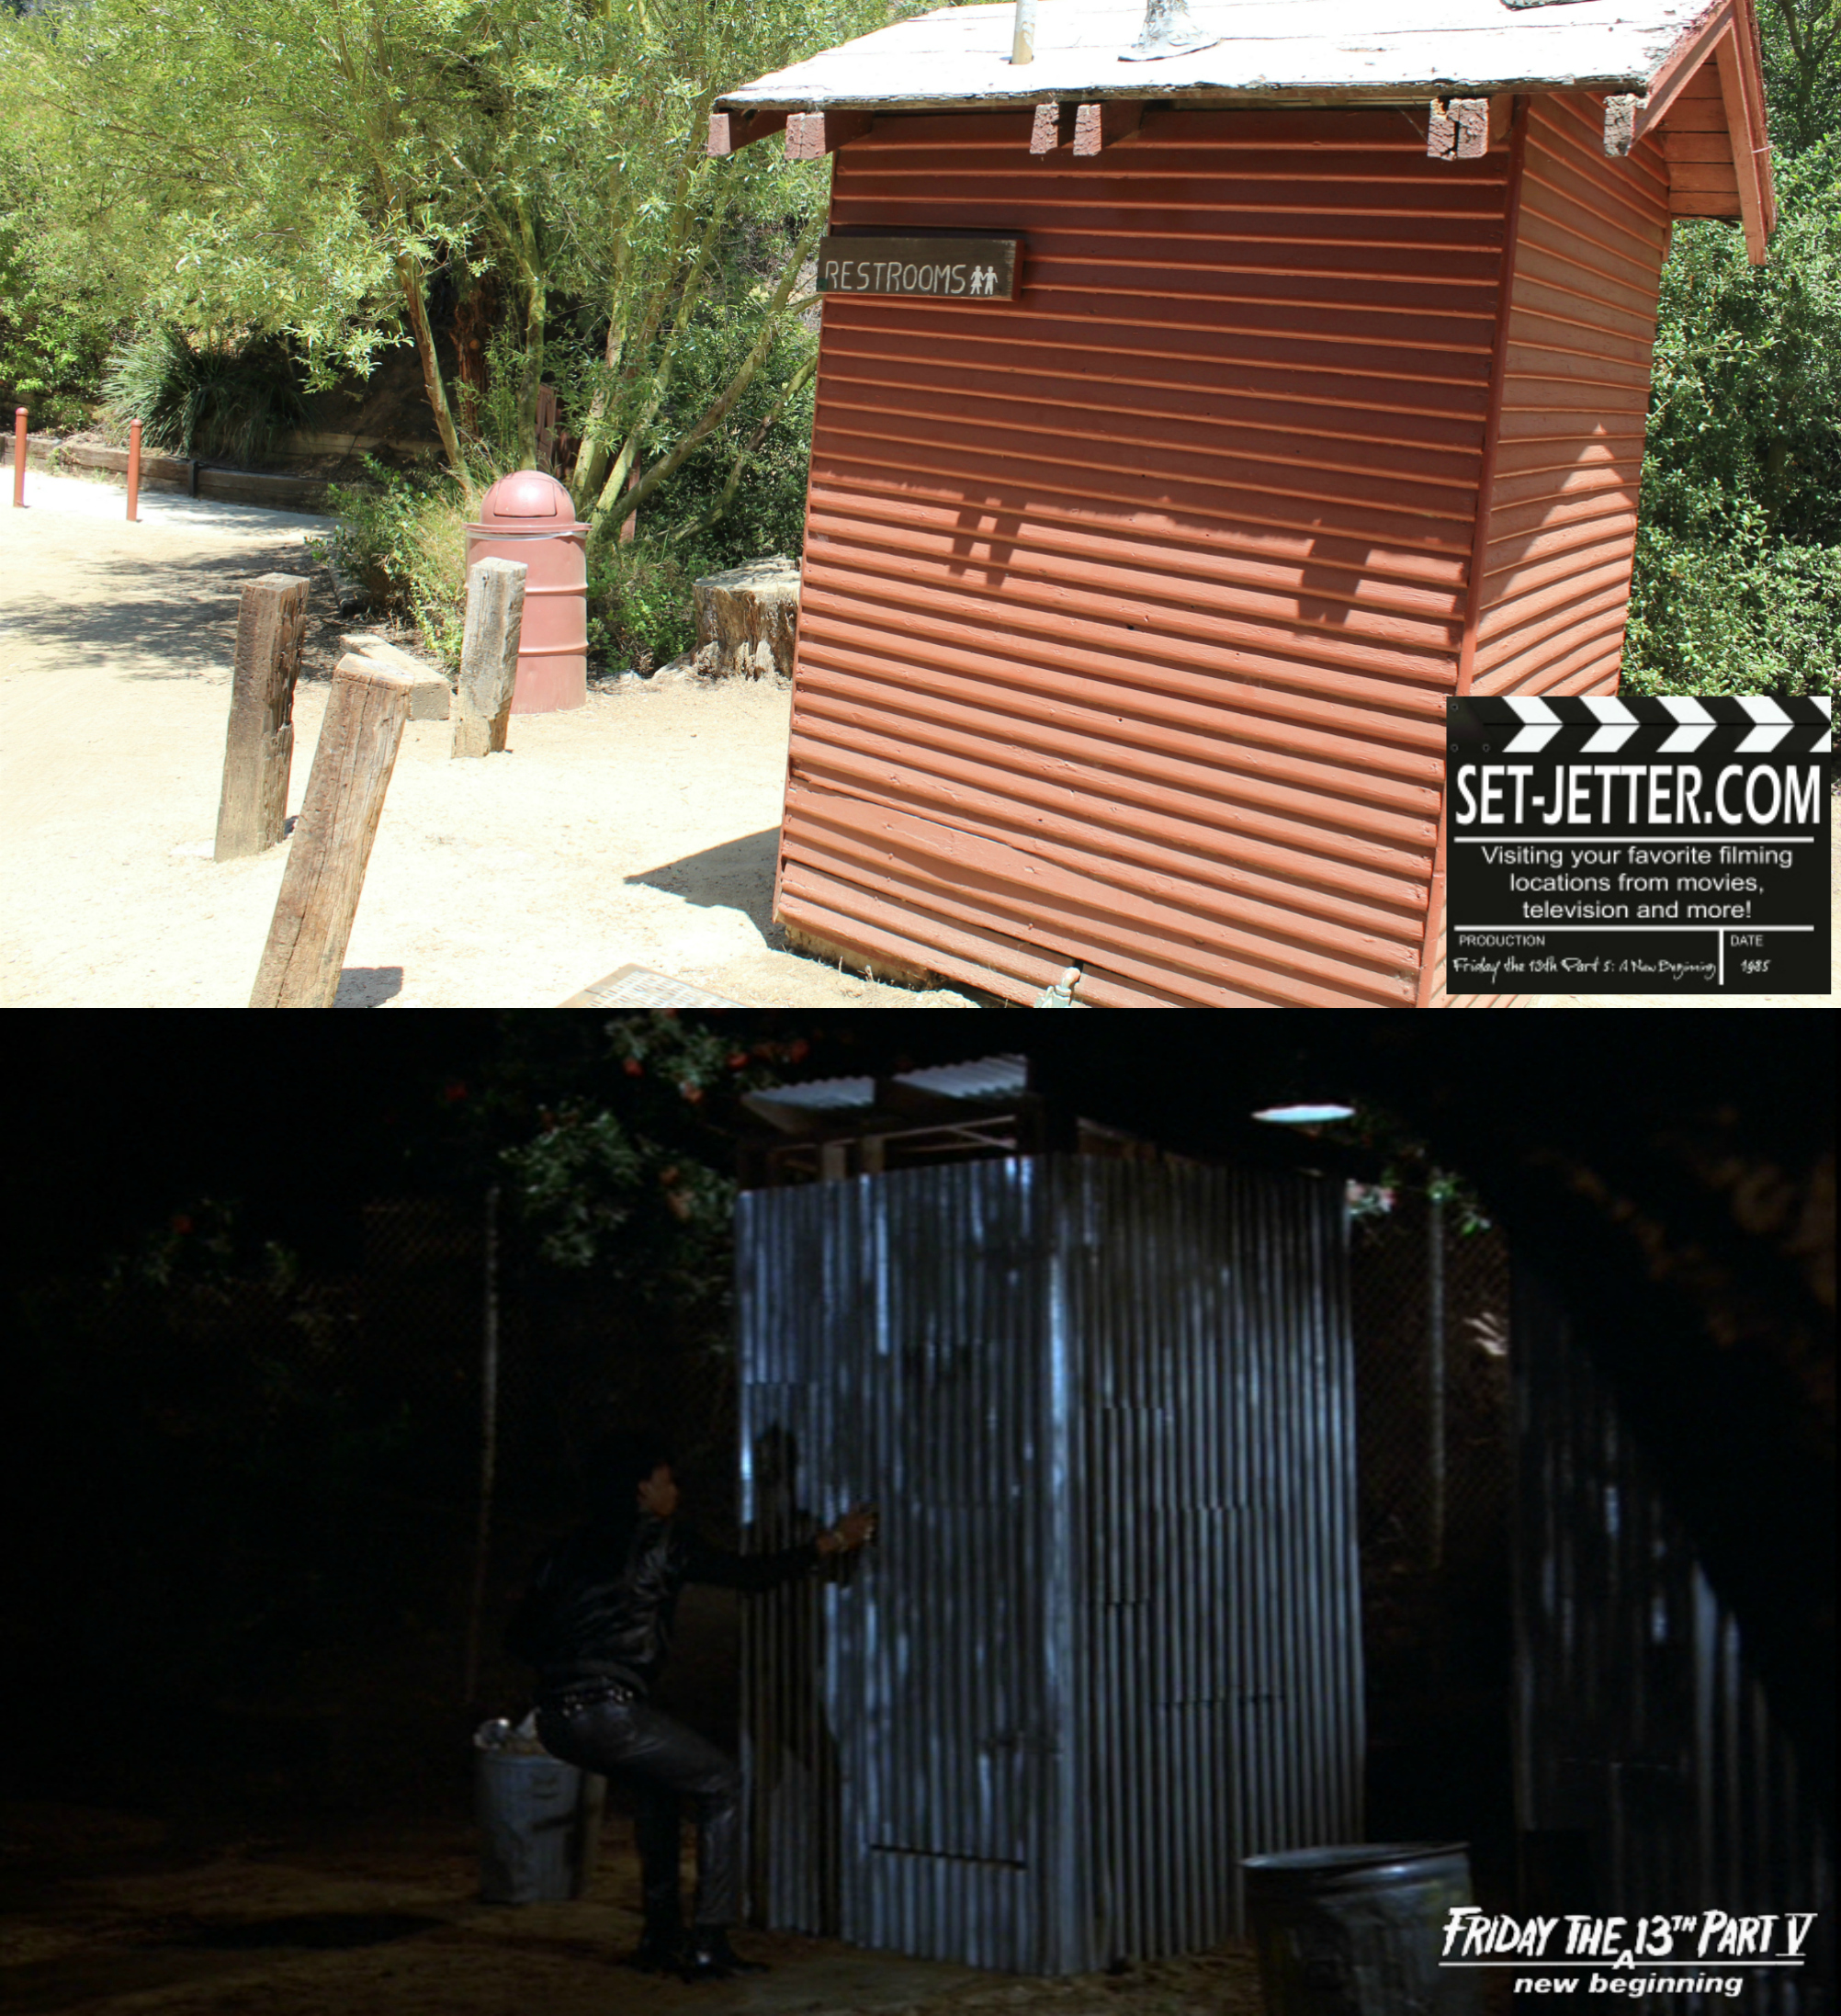 Friday the 13th Part V comparison 49.jpg